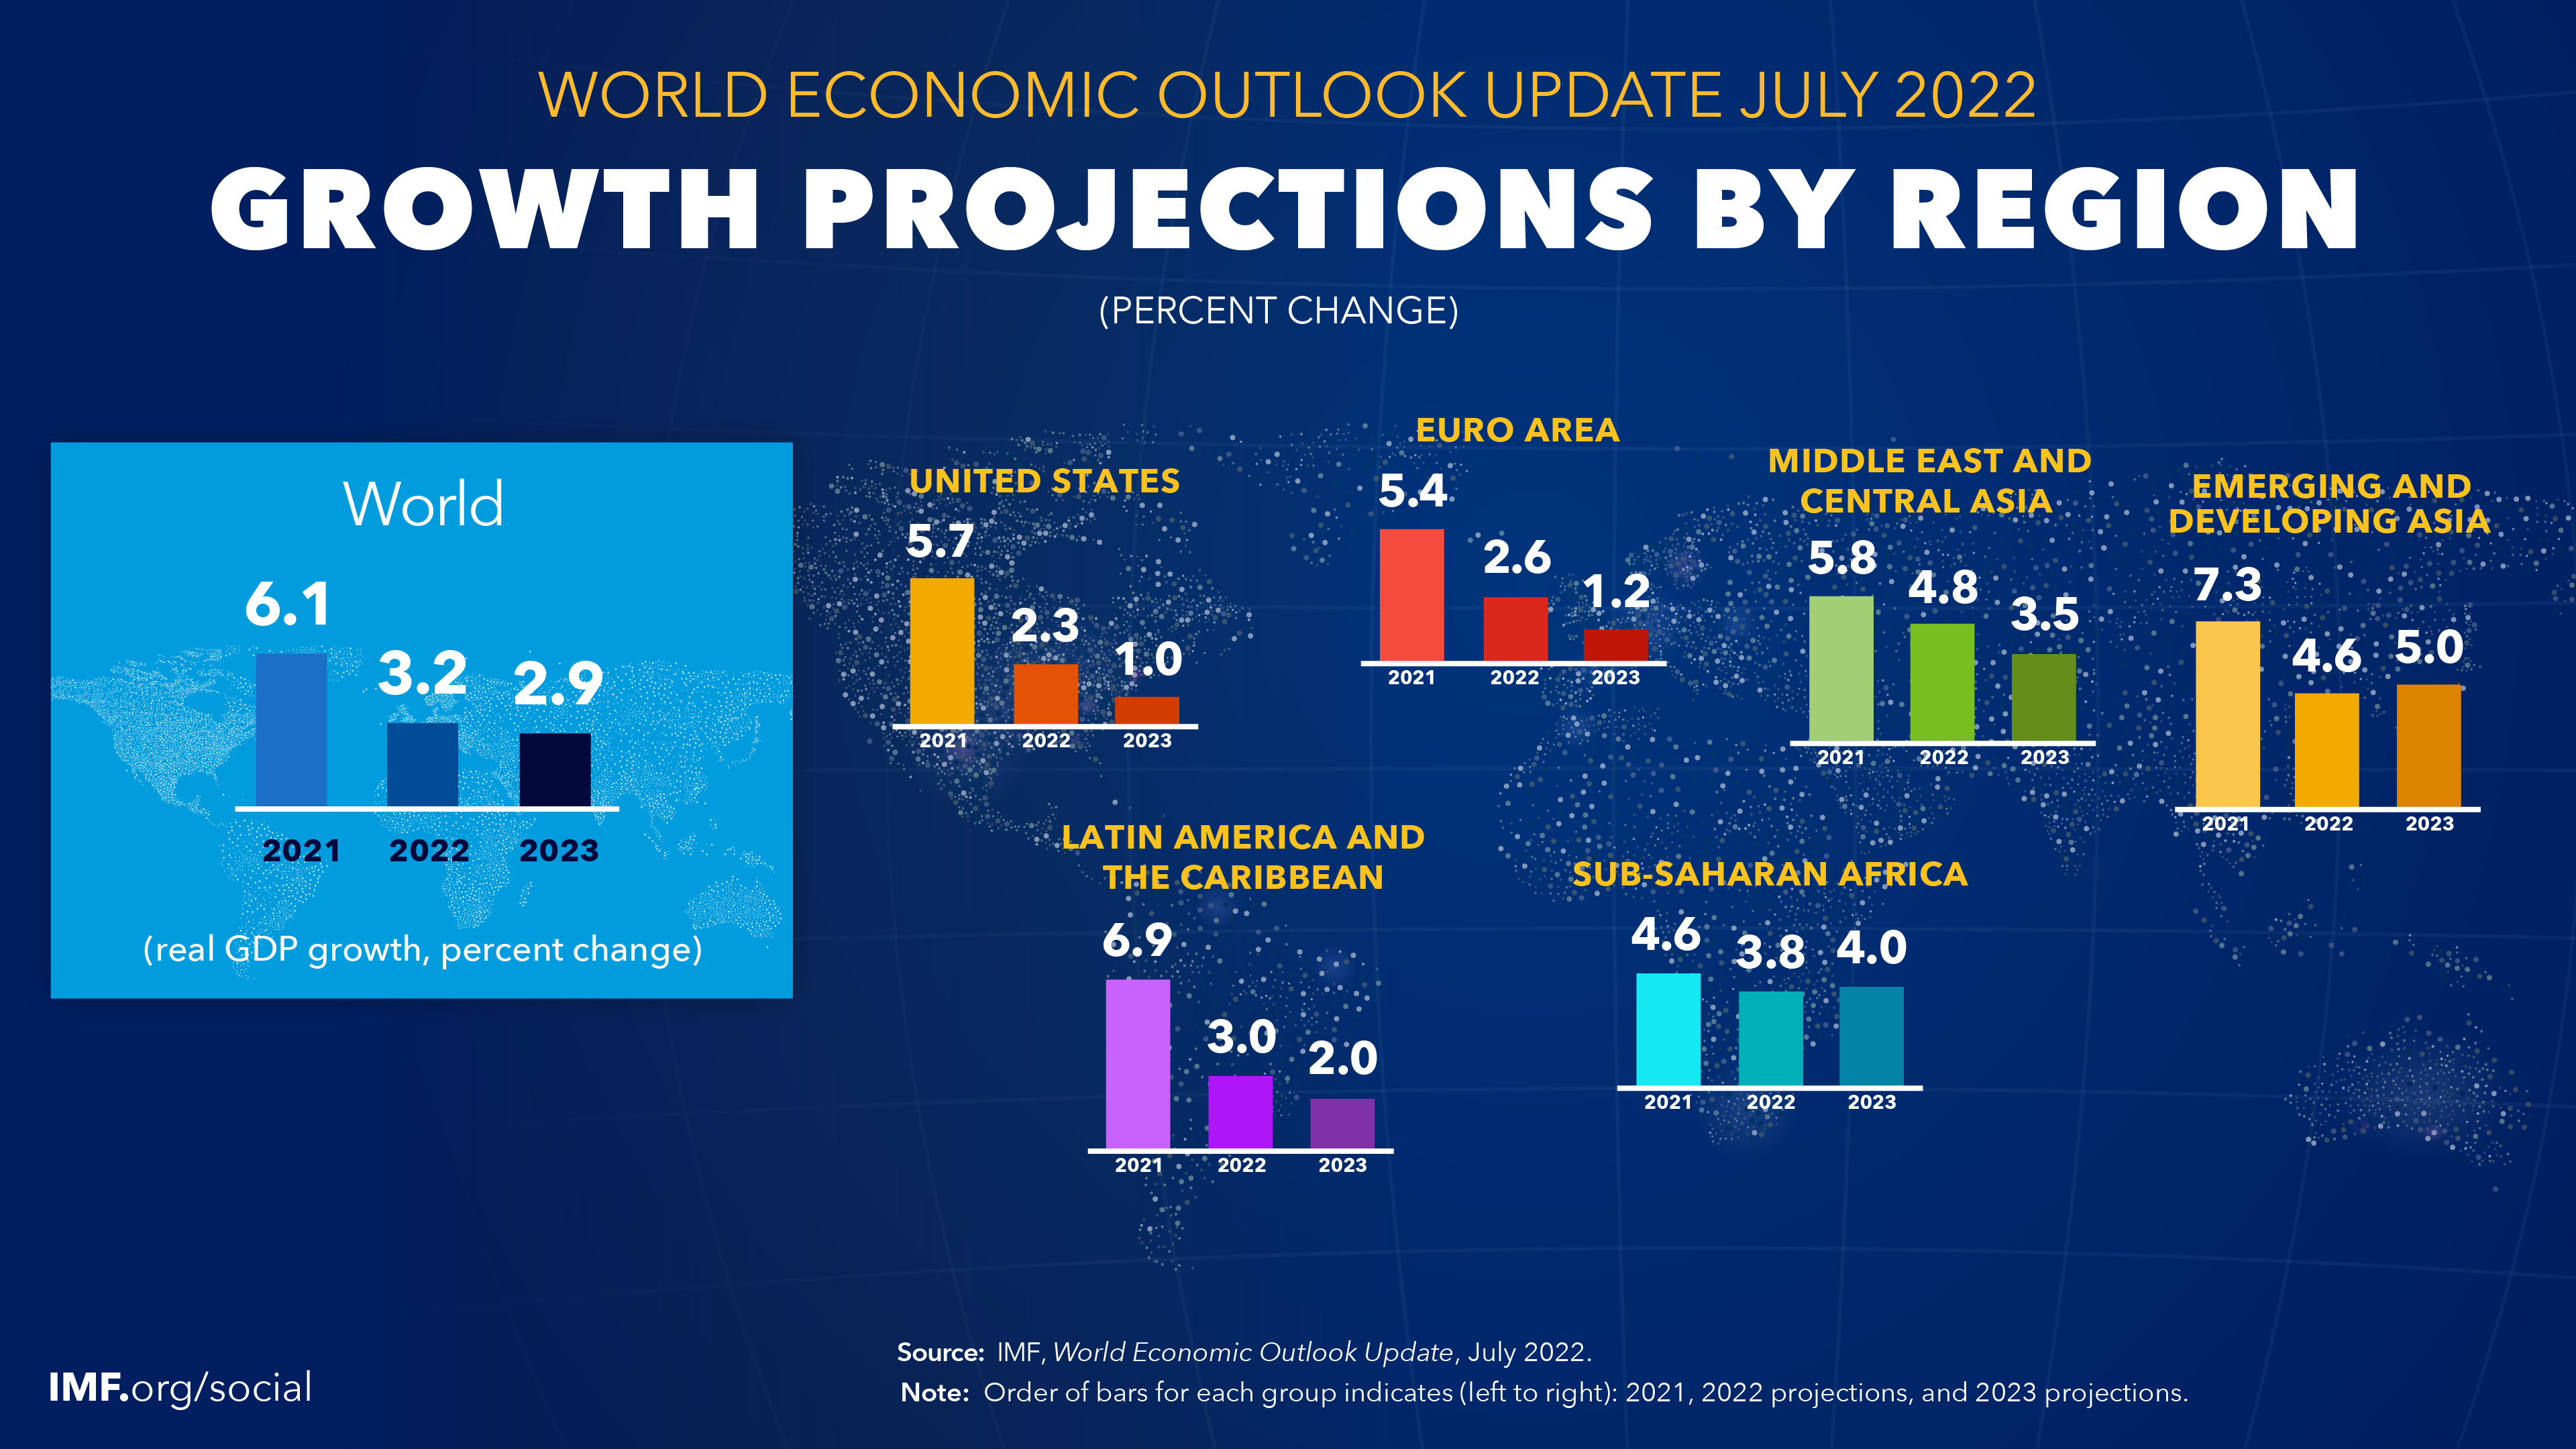 https://www.imf.org/-/media/Images/IMF/Publications/WEO/2022/July/English/weo-map-social-jul-2022.ashx